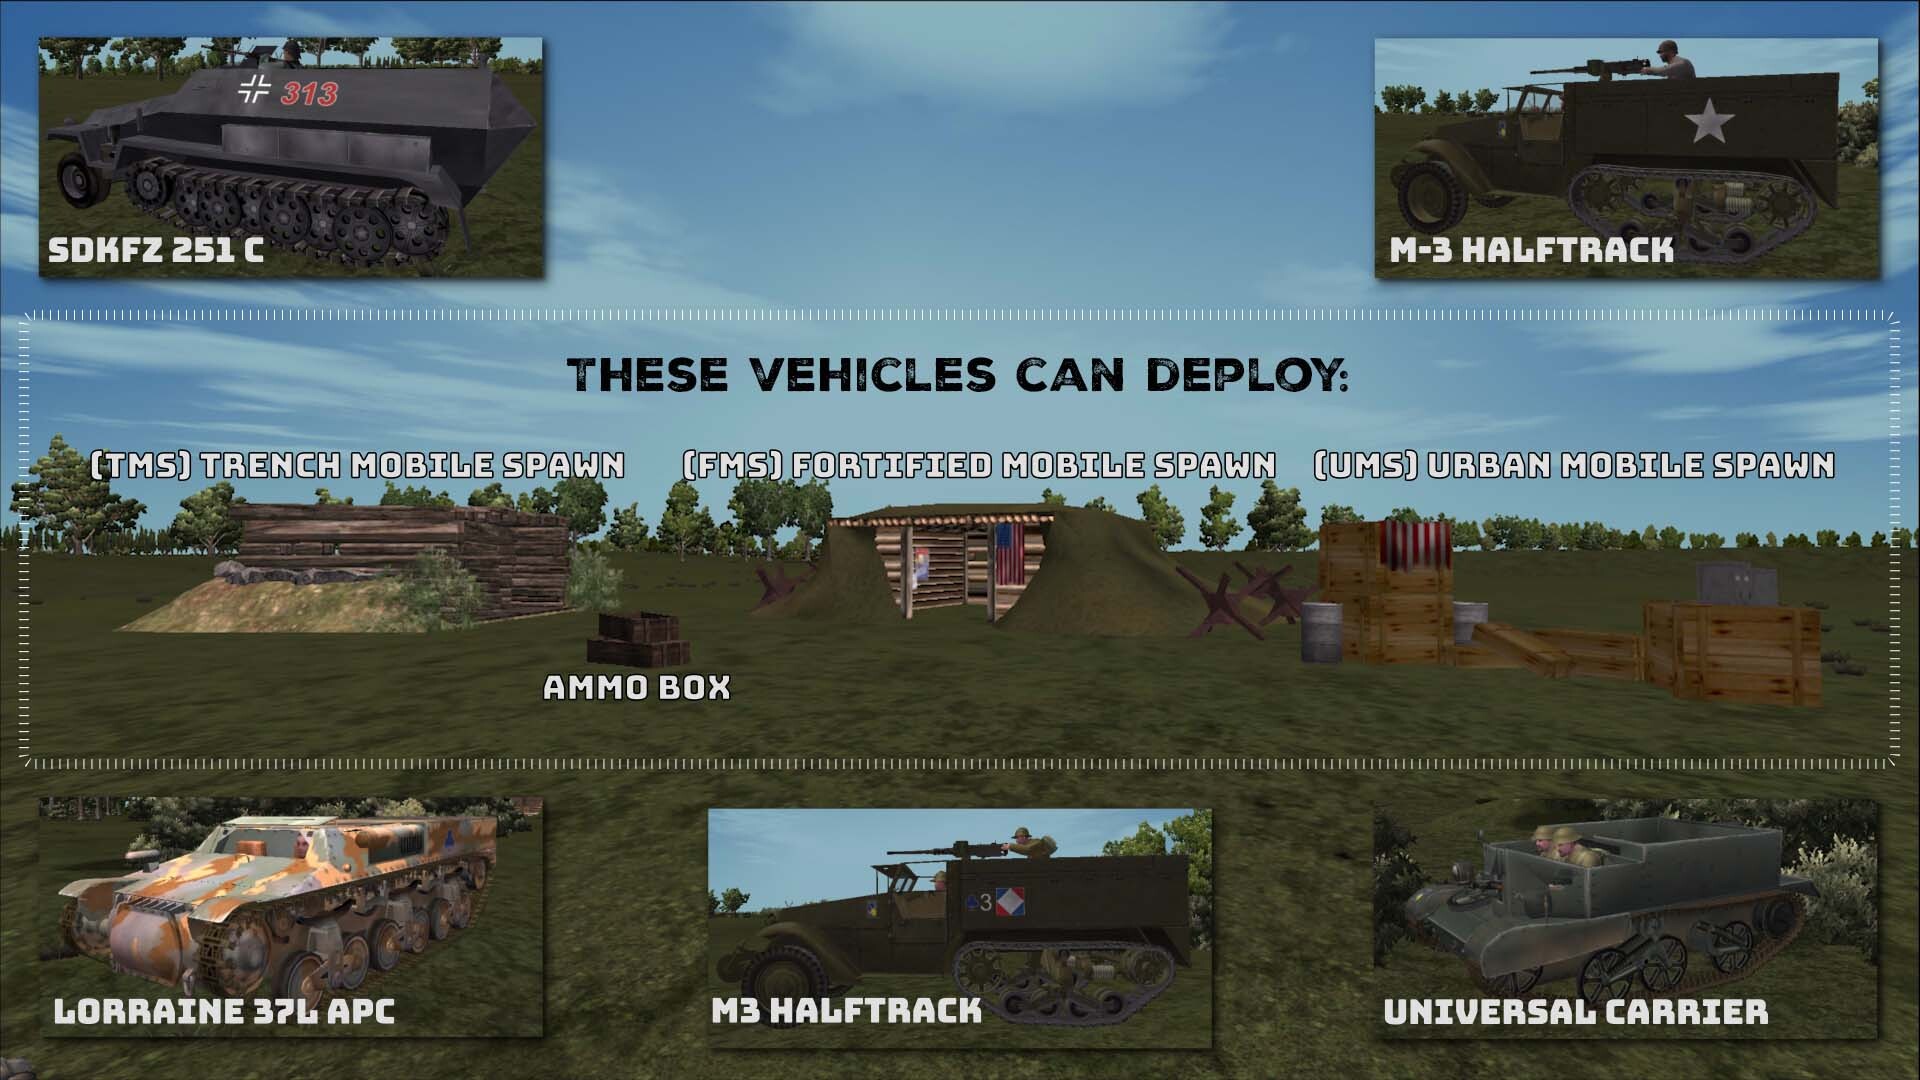 WWII Online Vehicles that can deploy the FMS